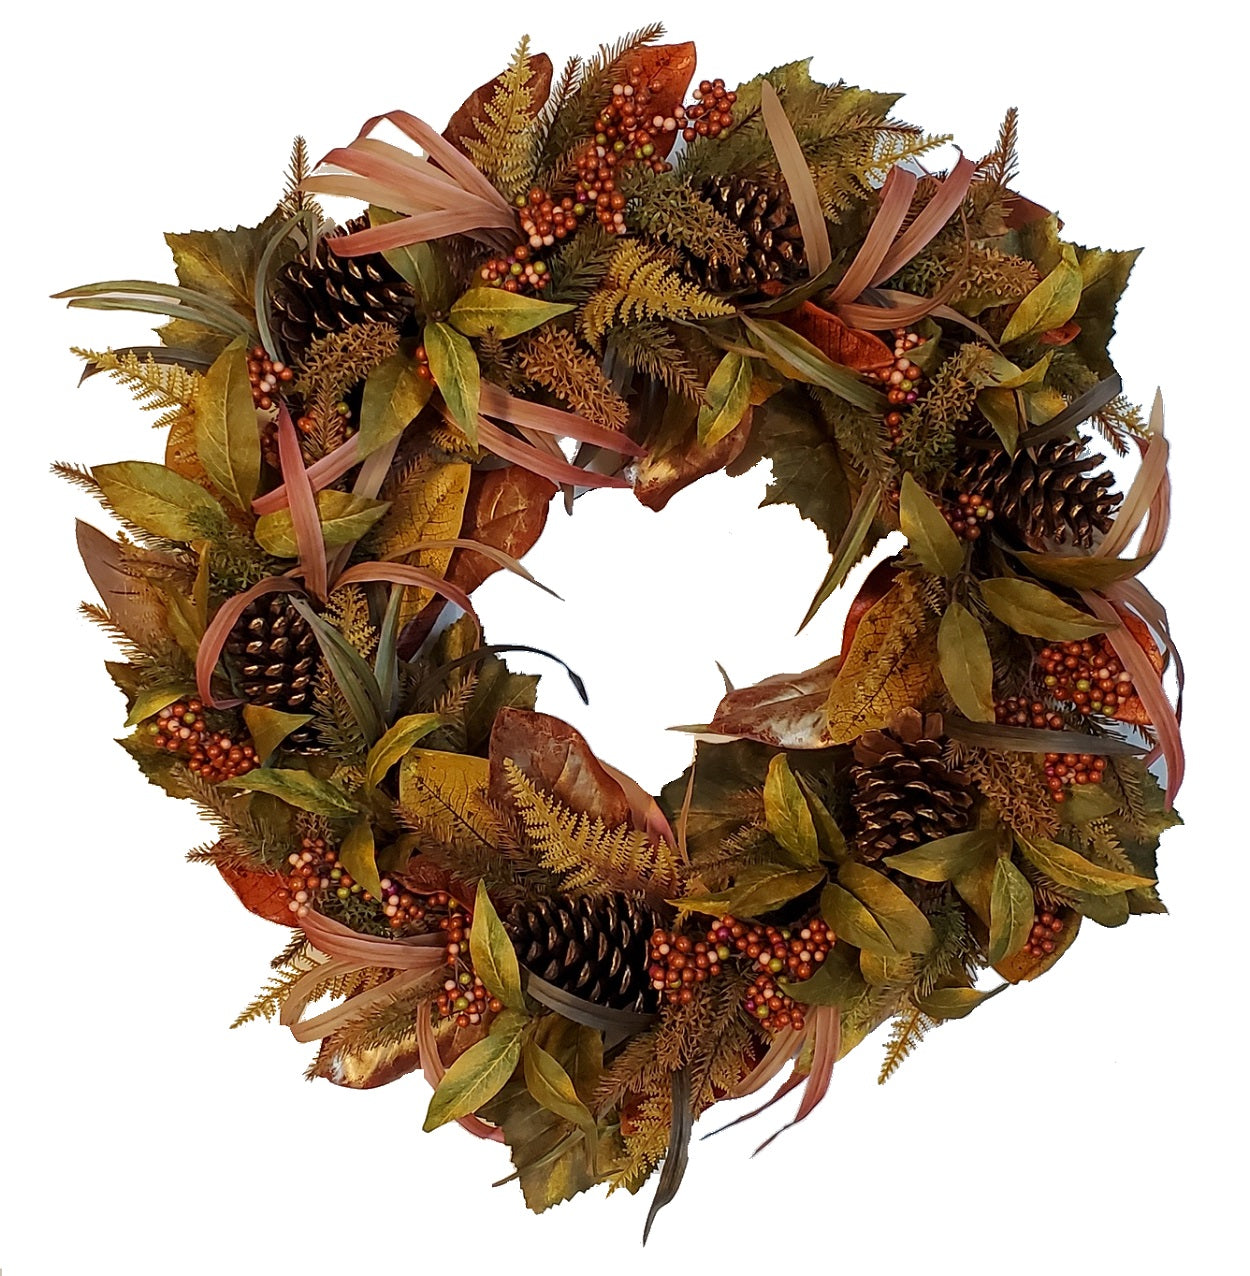 30-inch Harvest Decorated Artificial FERN Wreath with Pine Comes in Orange/Gold